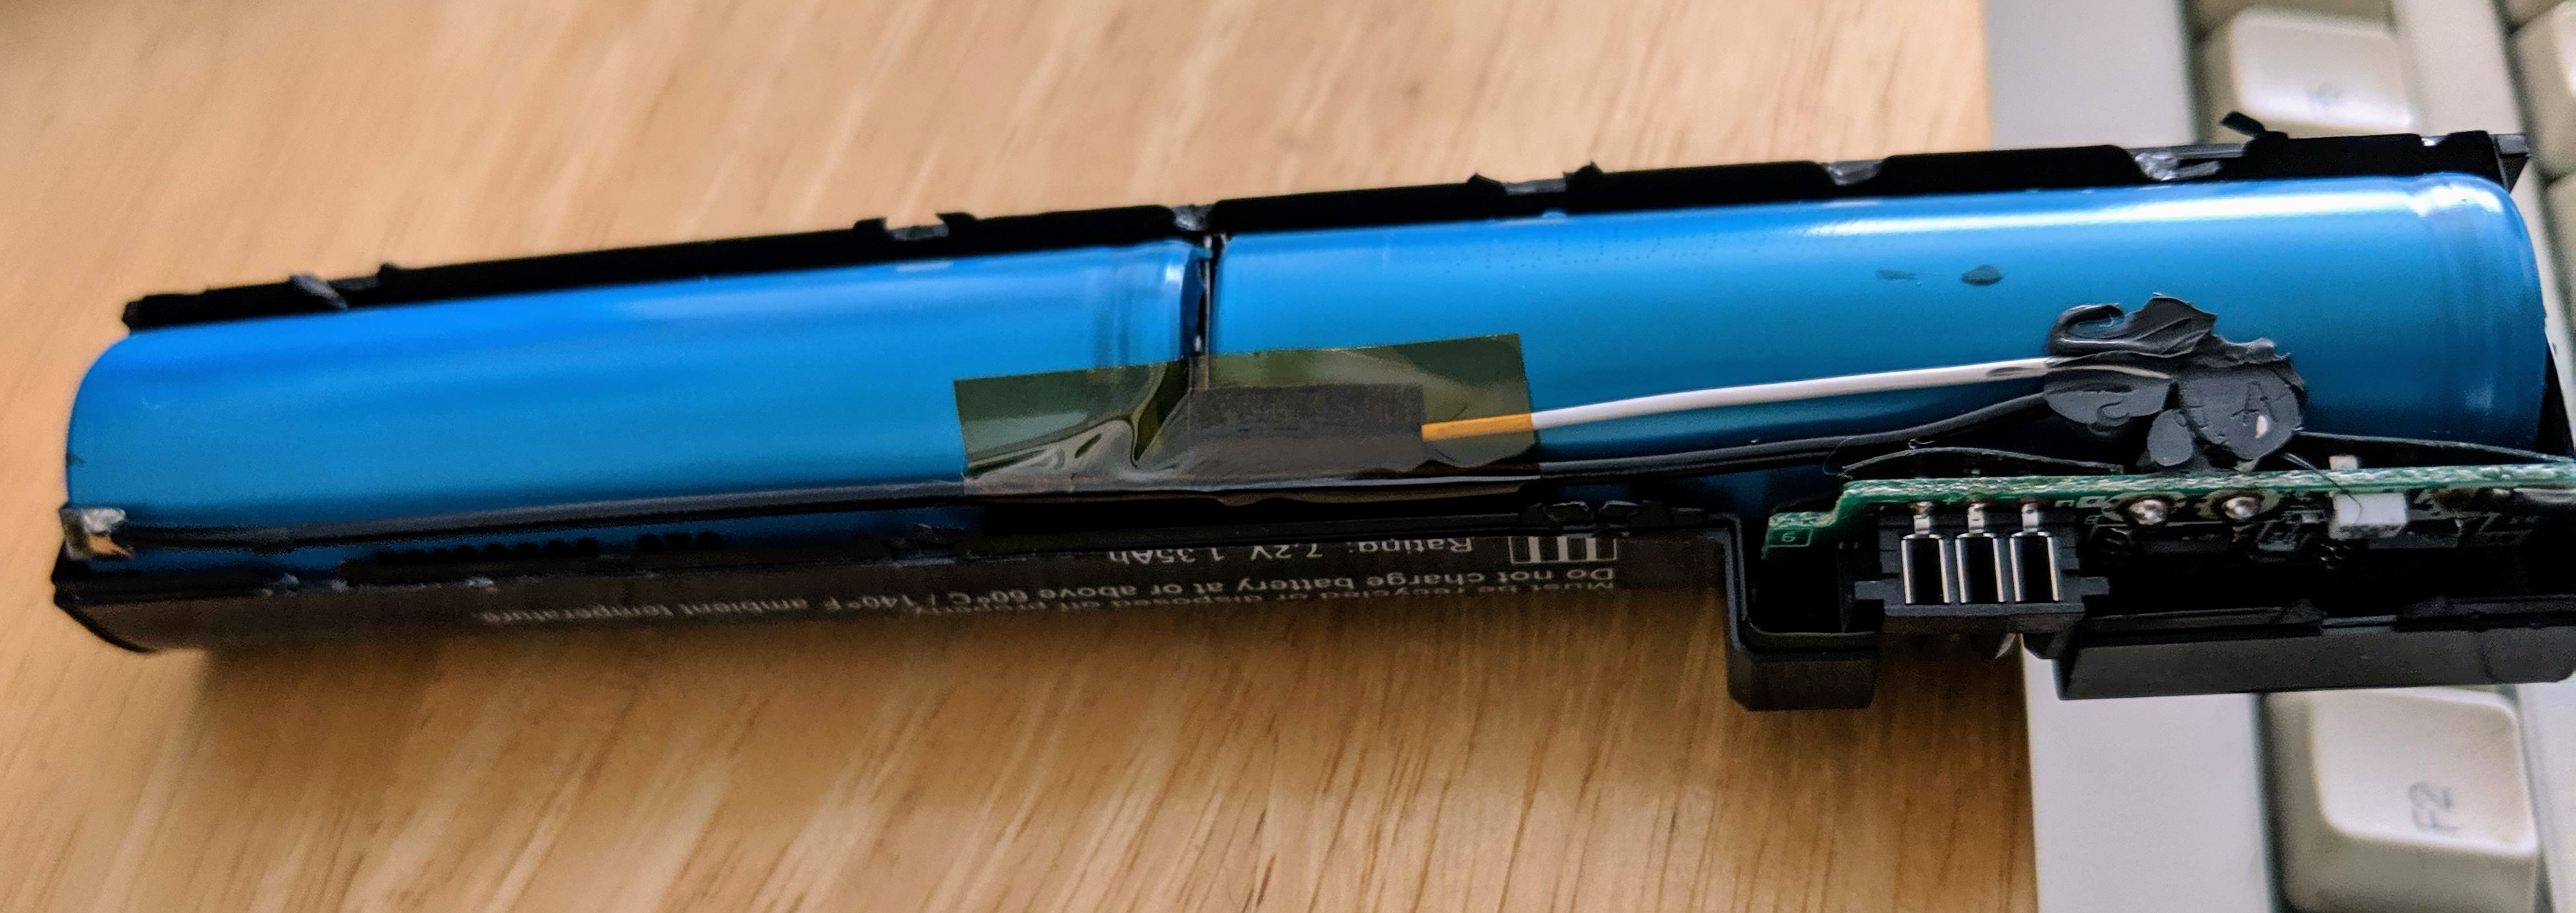 Open battery pack of HP 660LX